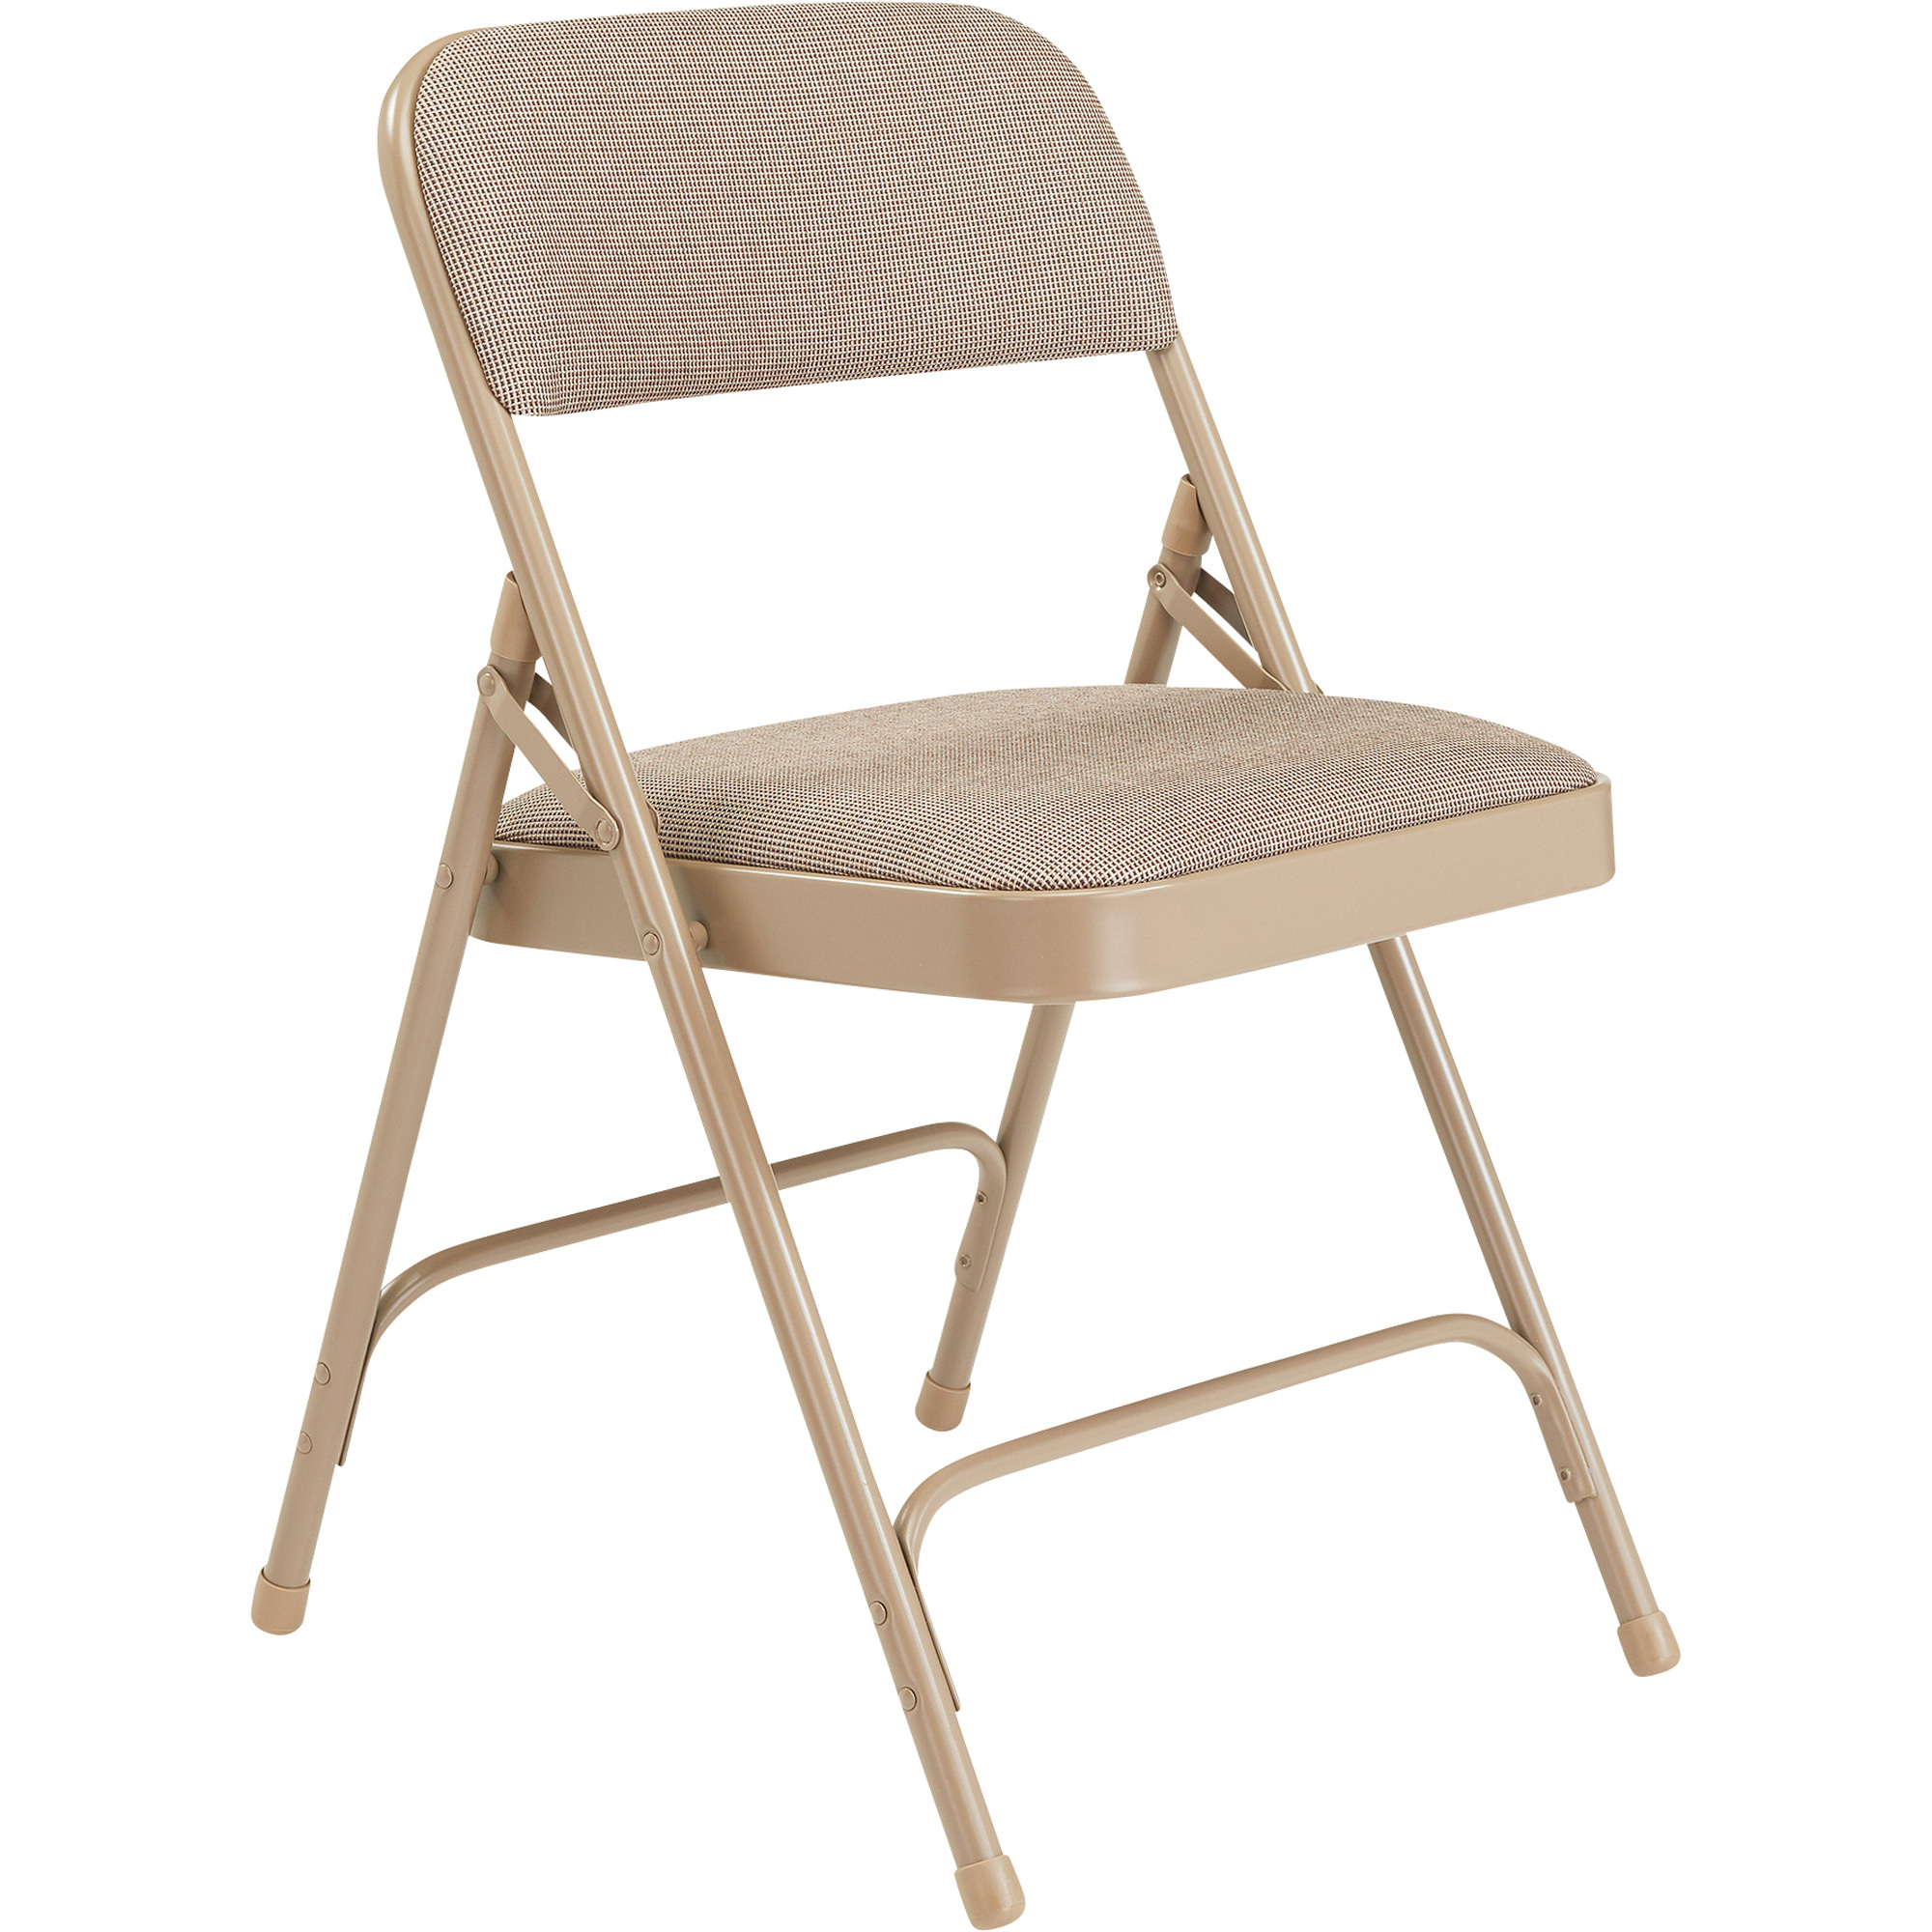 Steel Folding Chairs with Fabric Padded Seat and Back — Set of 4, Cafe Beige/Beige, Model - National Public Seating 2201